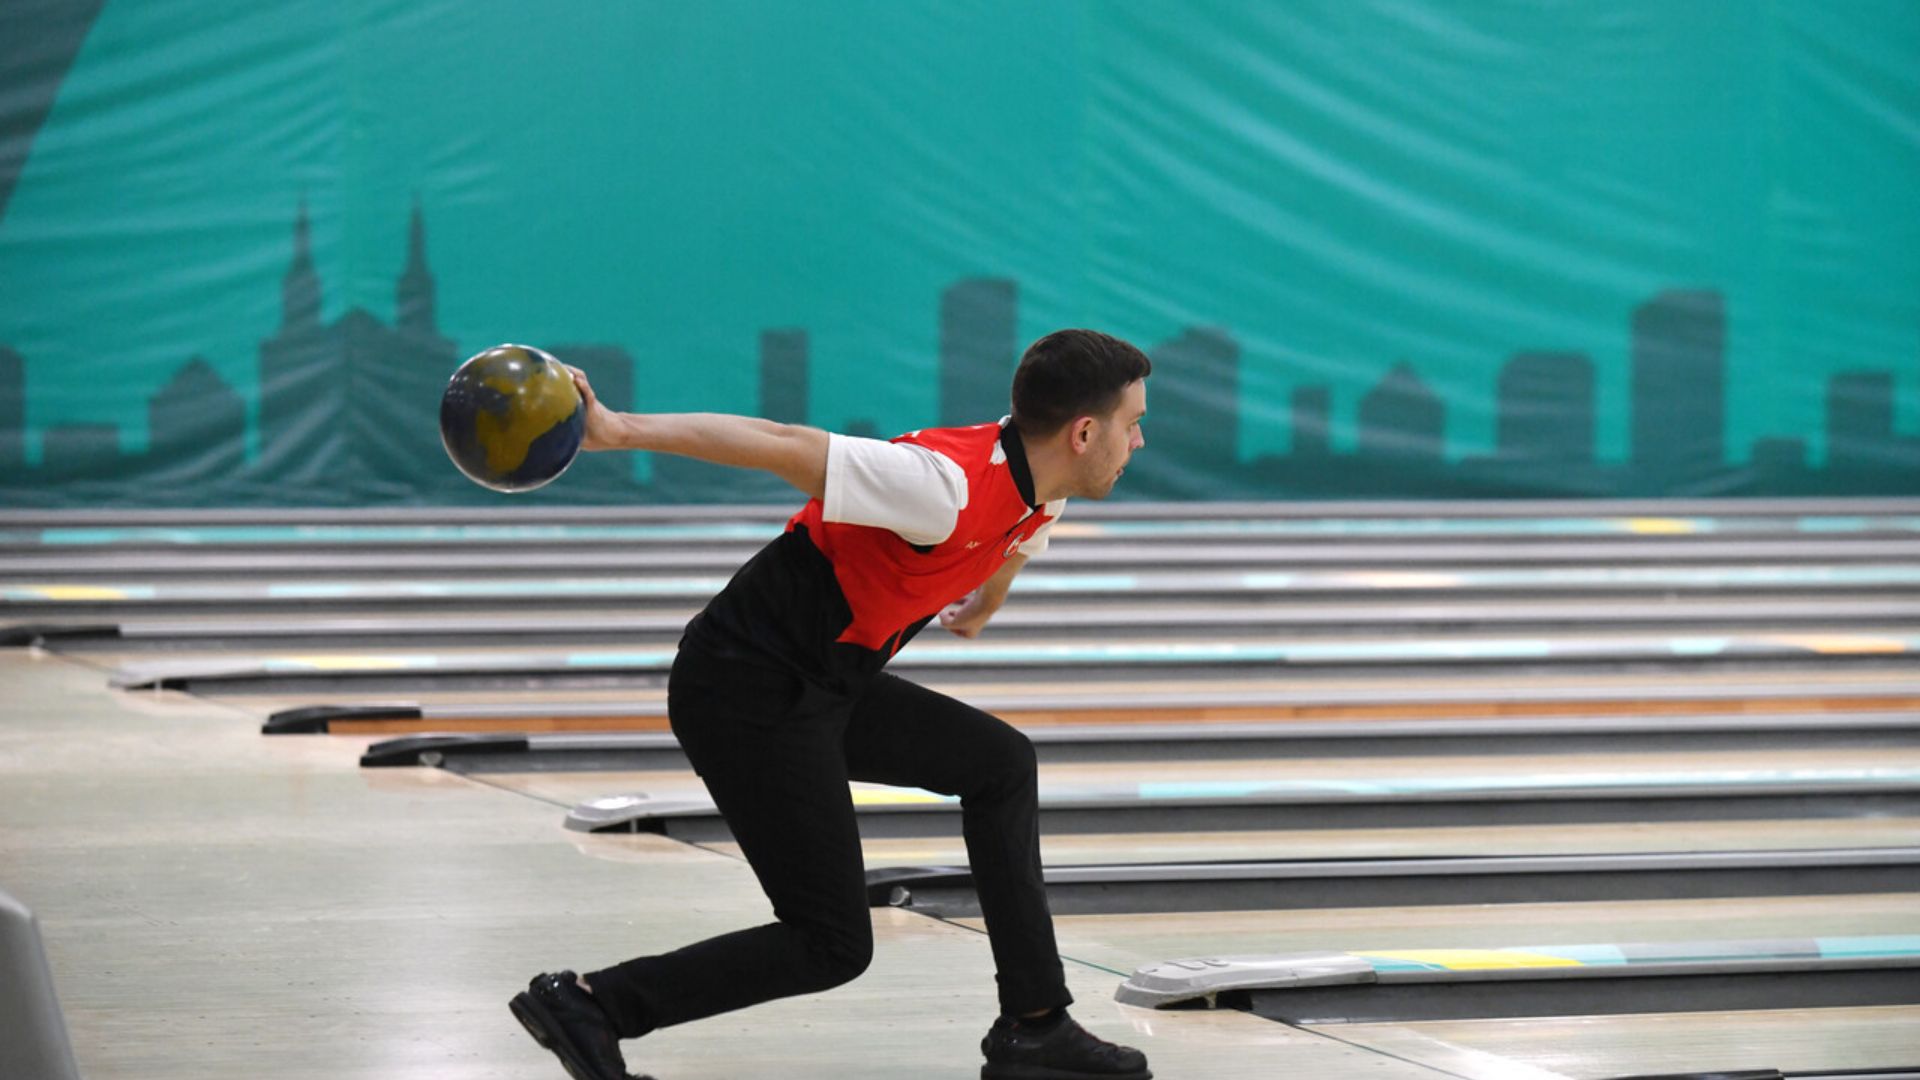 Bowling Determines Male Semifinalists at the Pan American Games